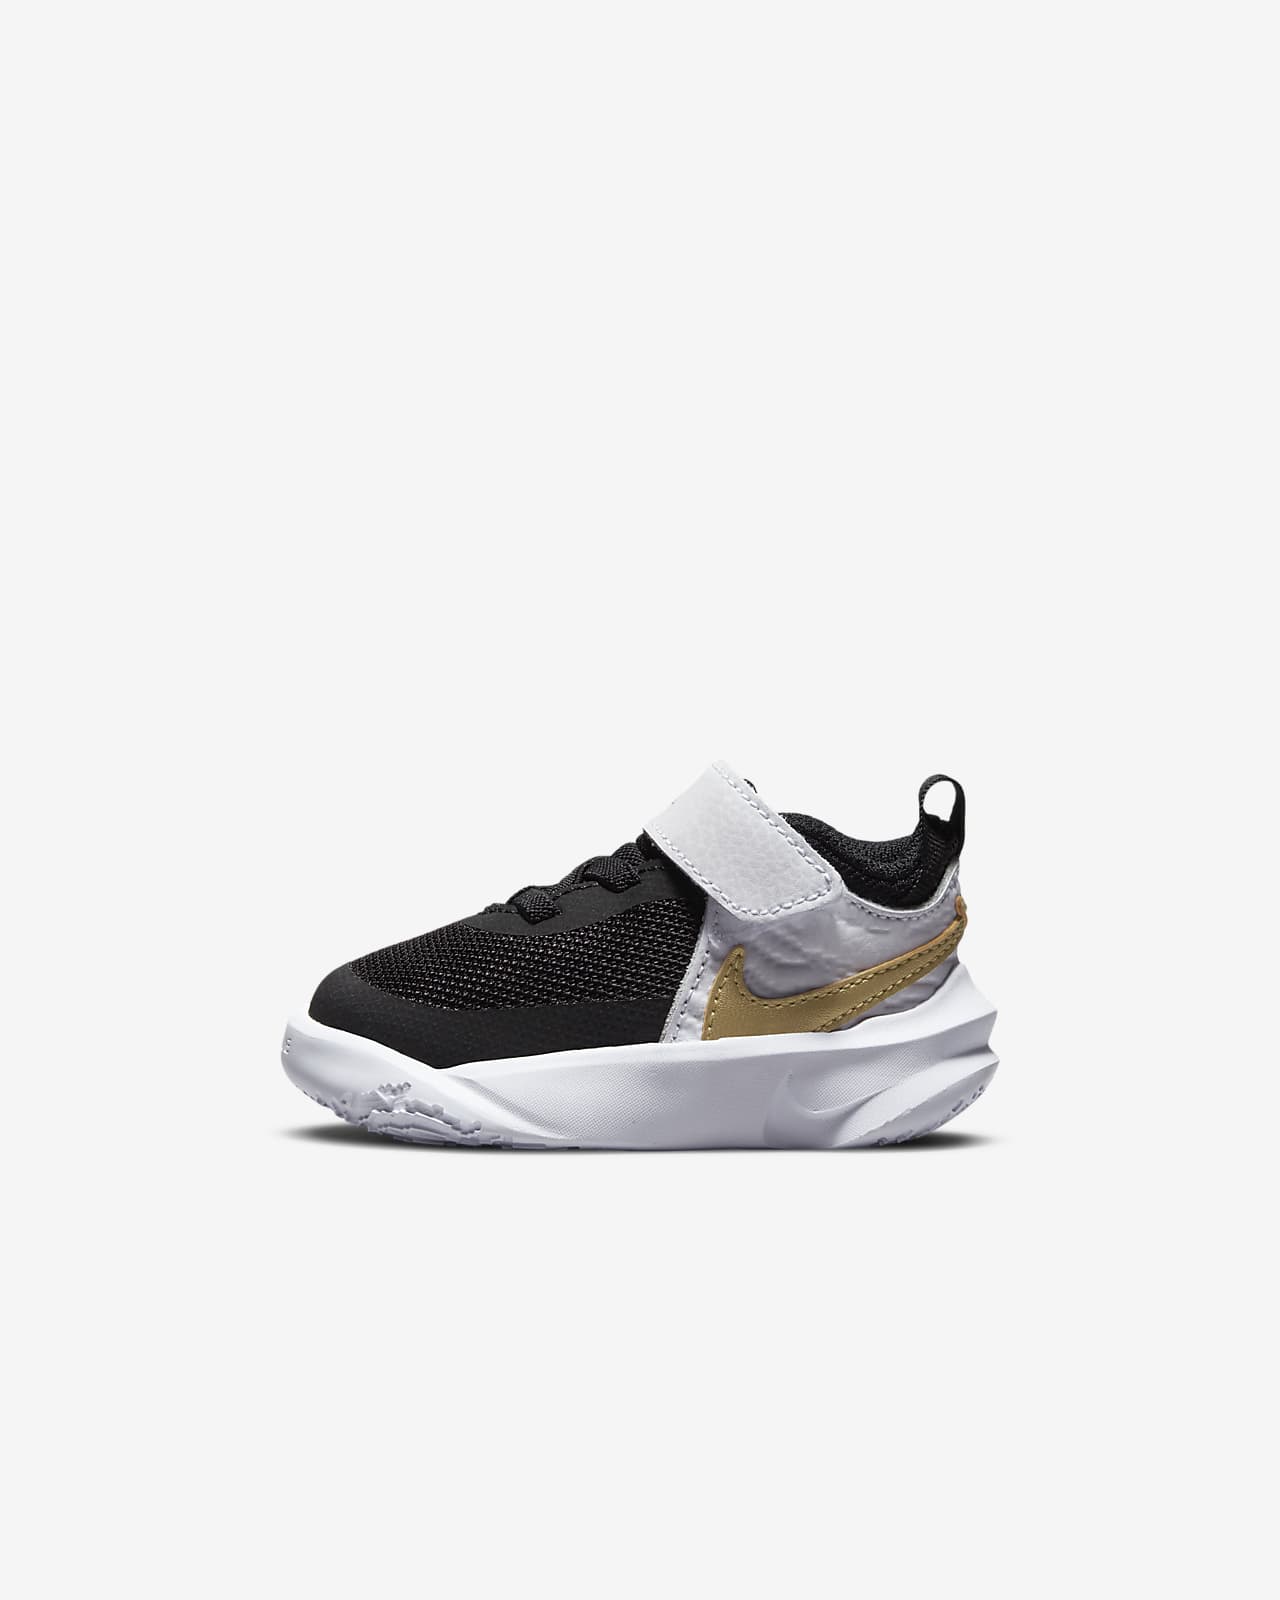 toddler nike shoes on sale